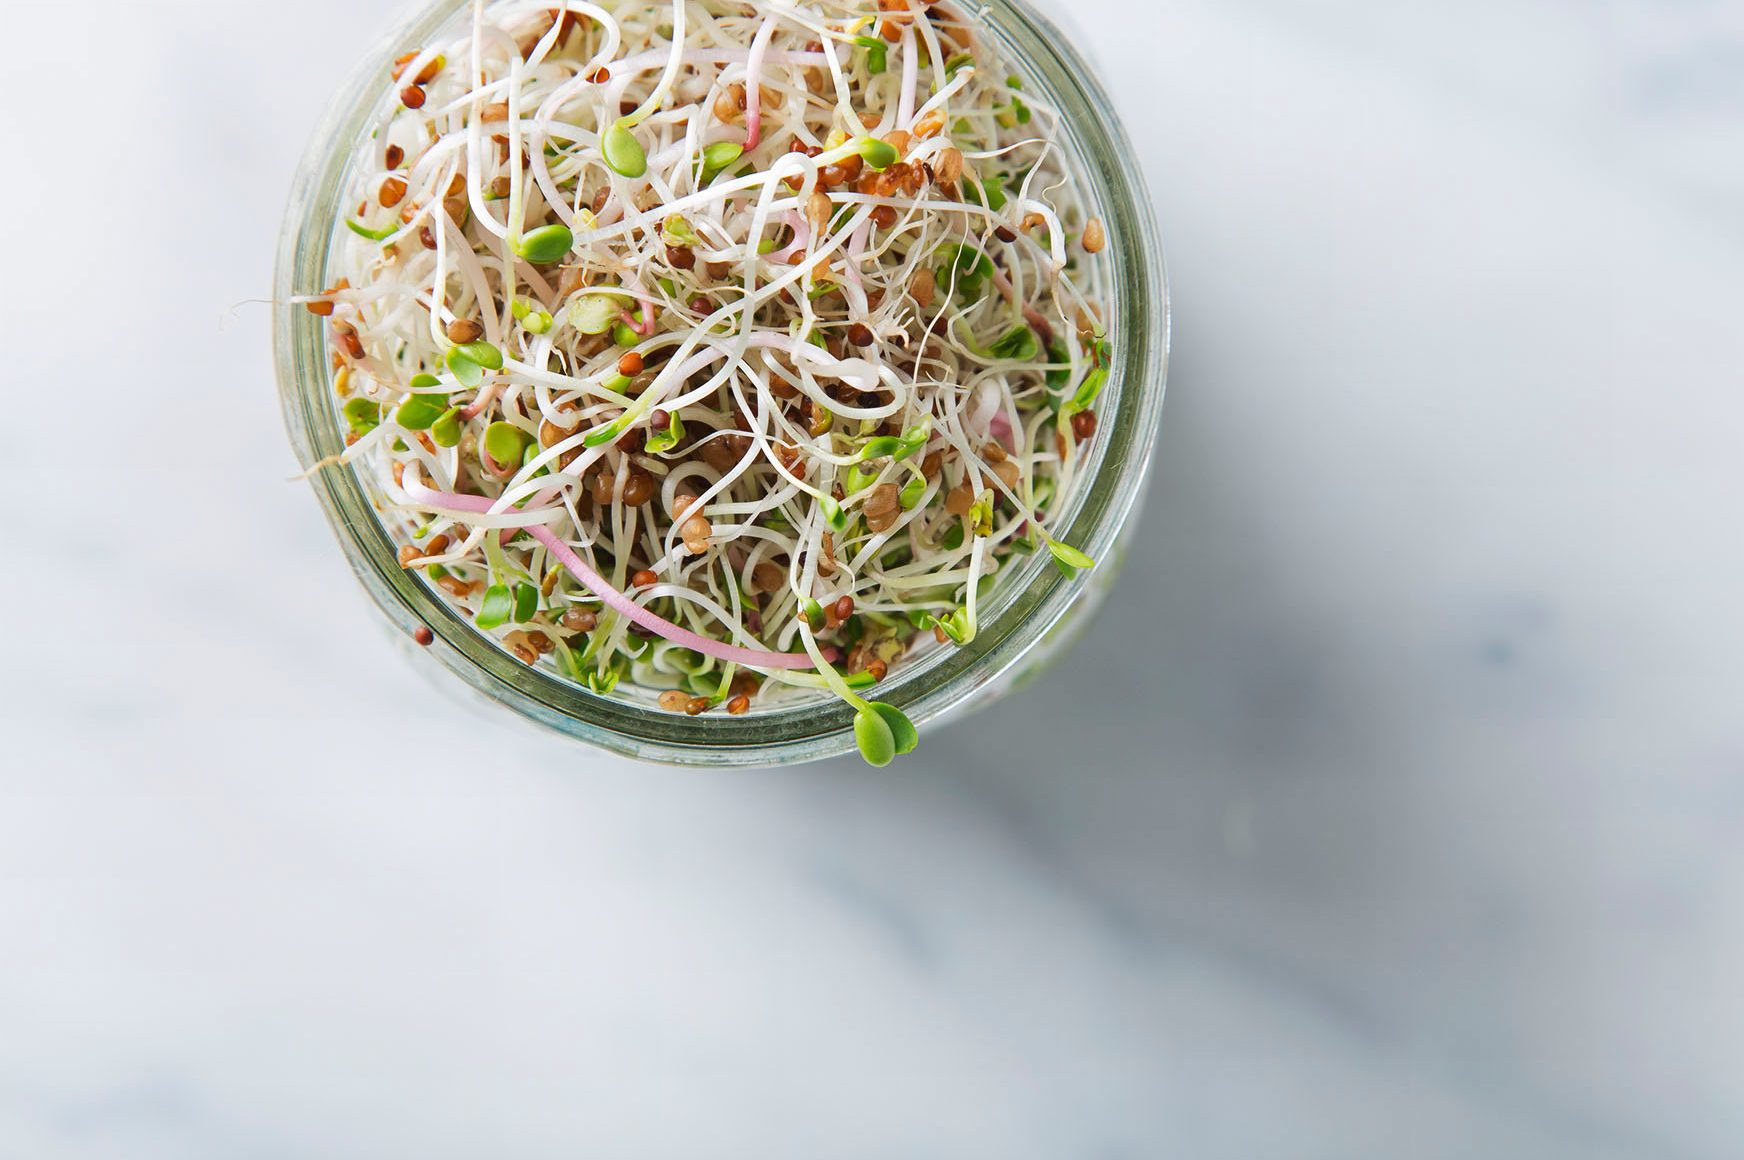 How to Grow Sprouts in a Jar | picklesnhoney.com #sprouts #jar #diy #recipe